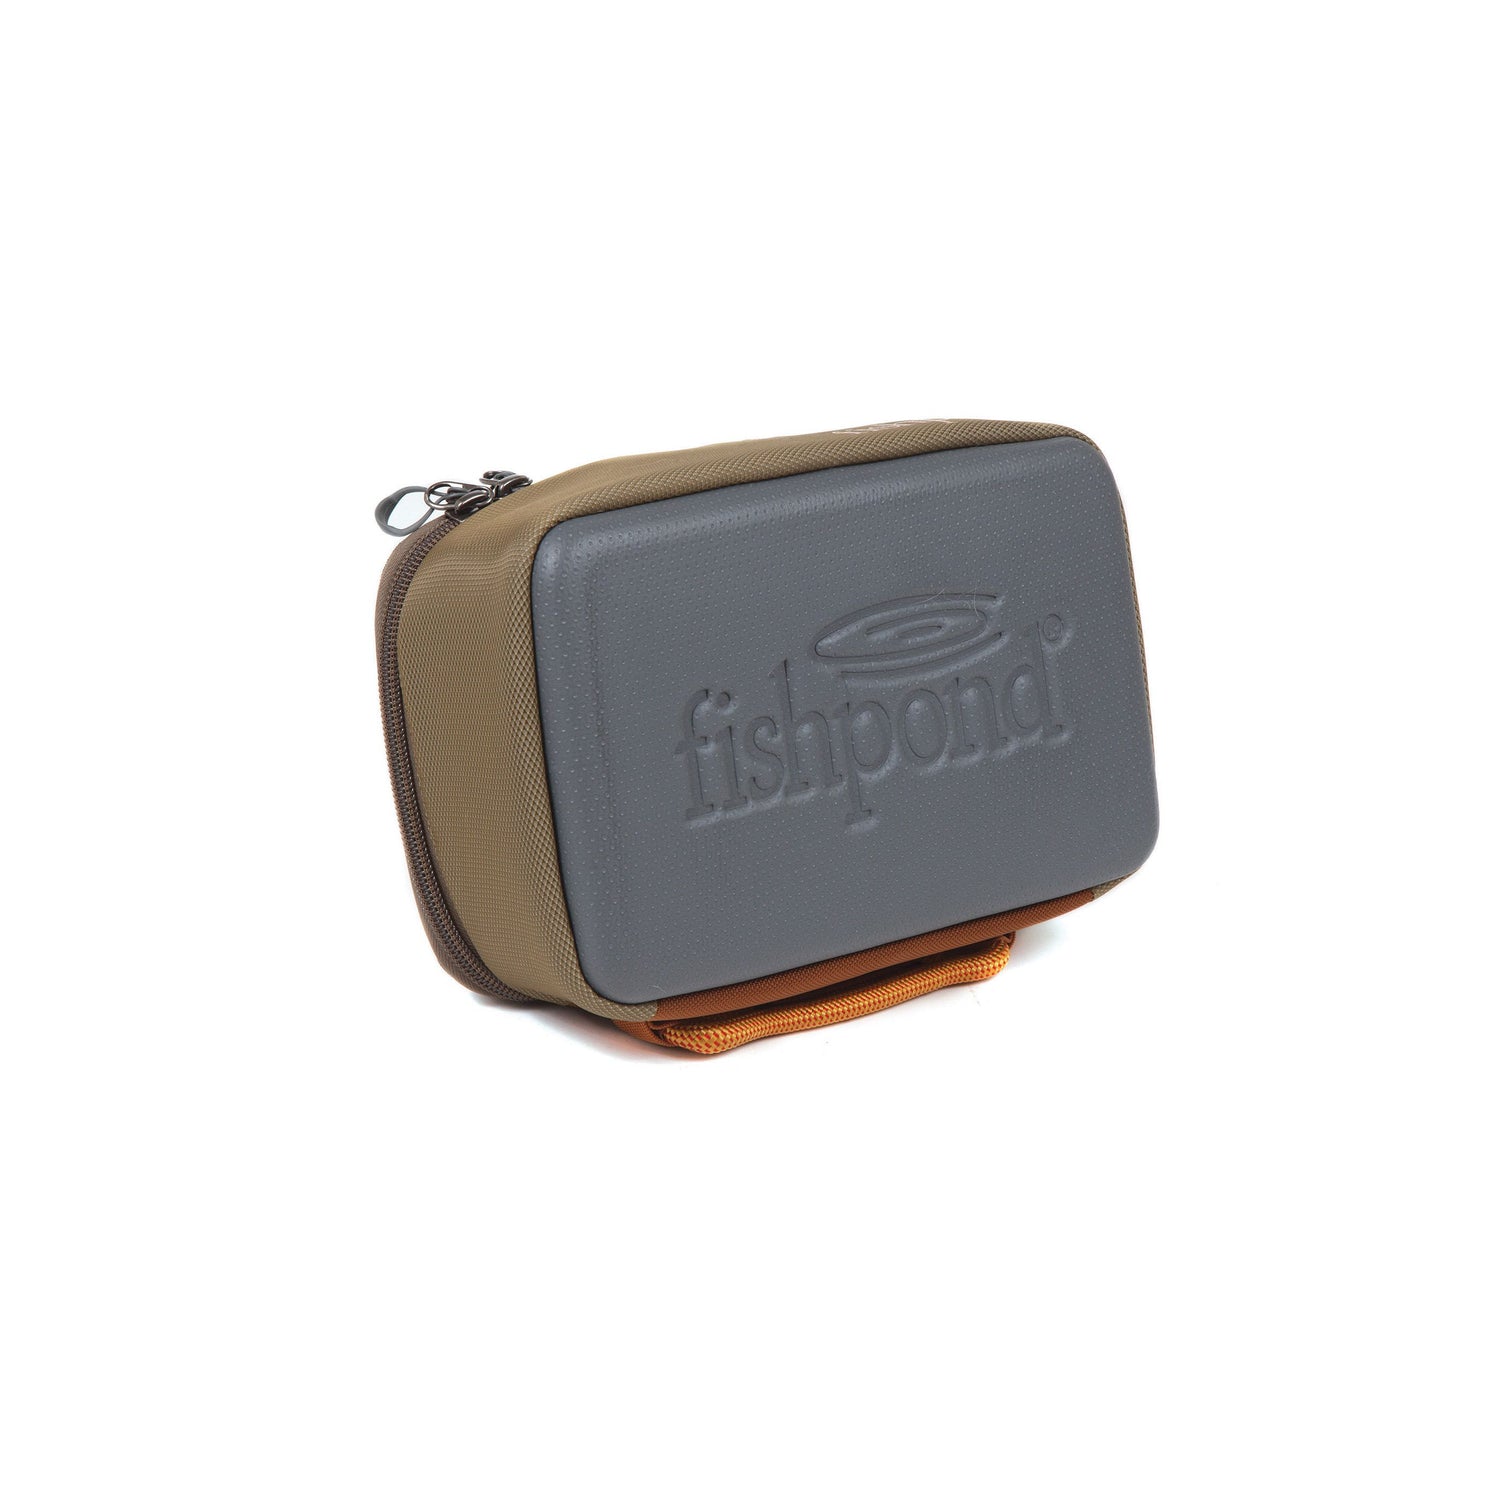 Fishpond / Fish Pond Reel Case For Your Fishing Reels - sporting